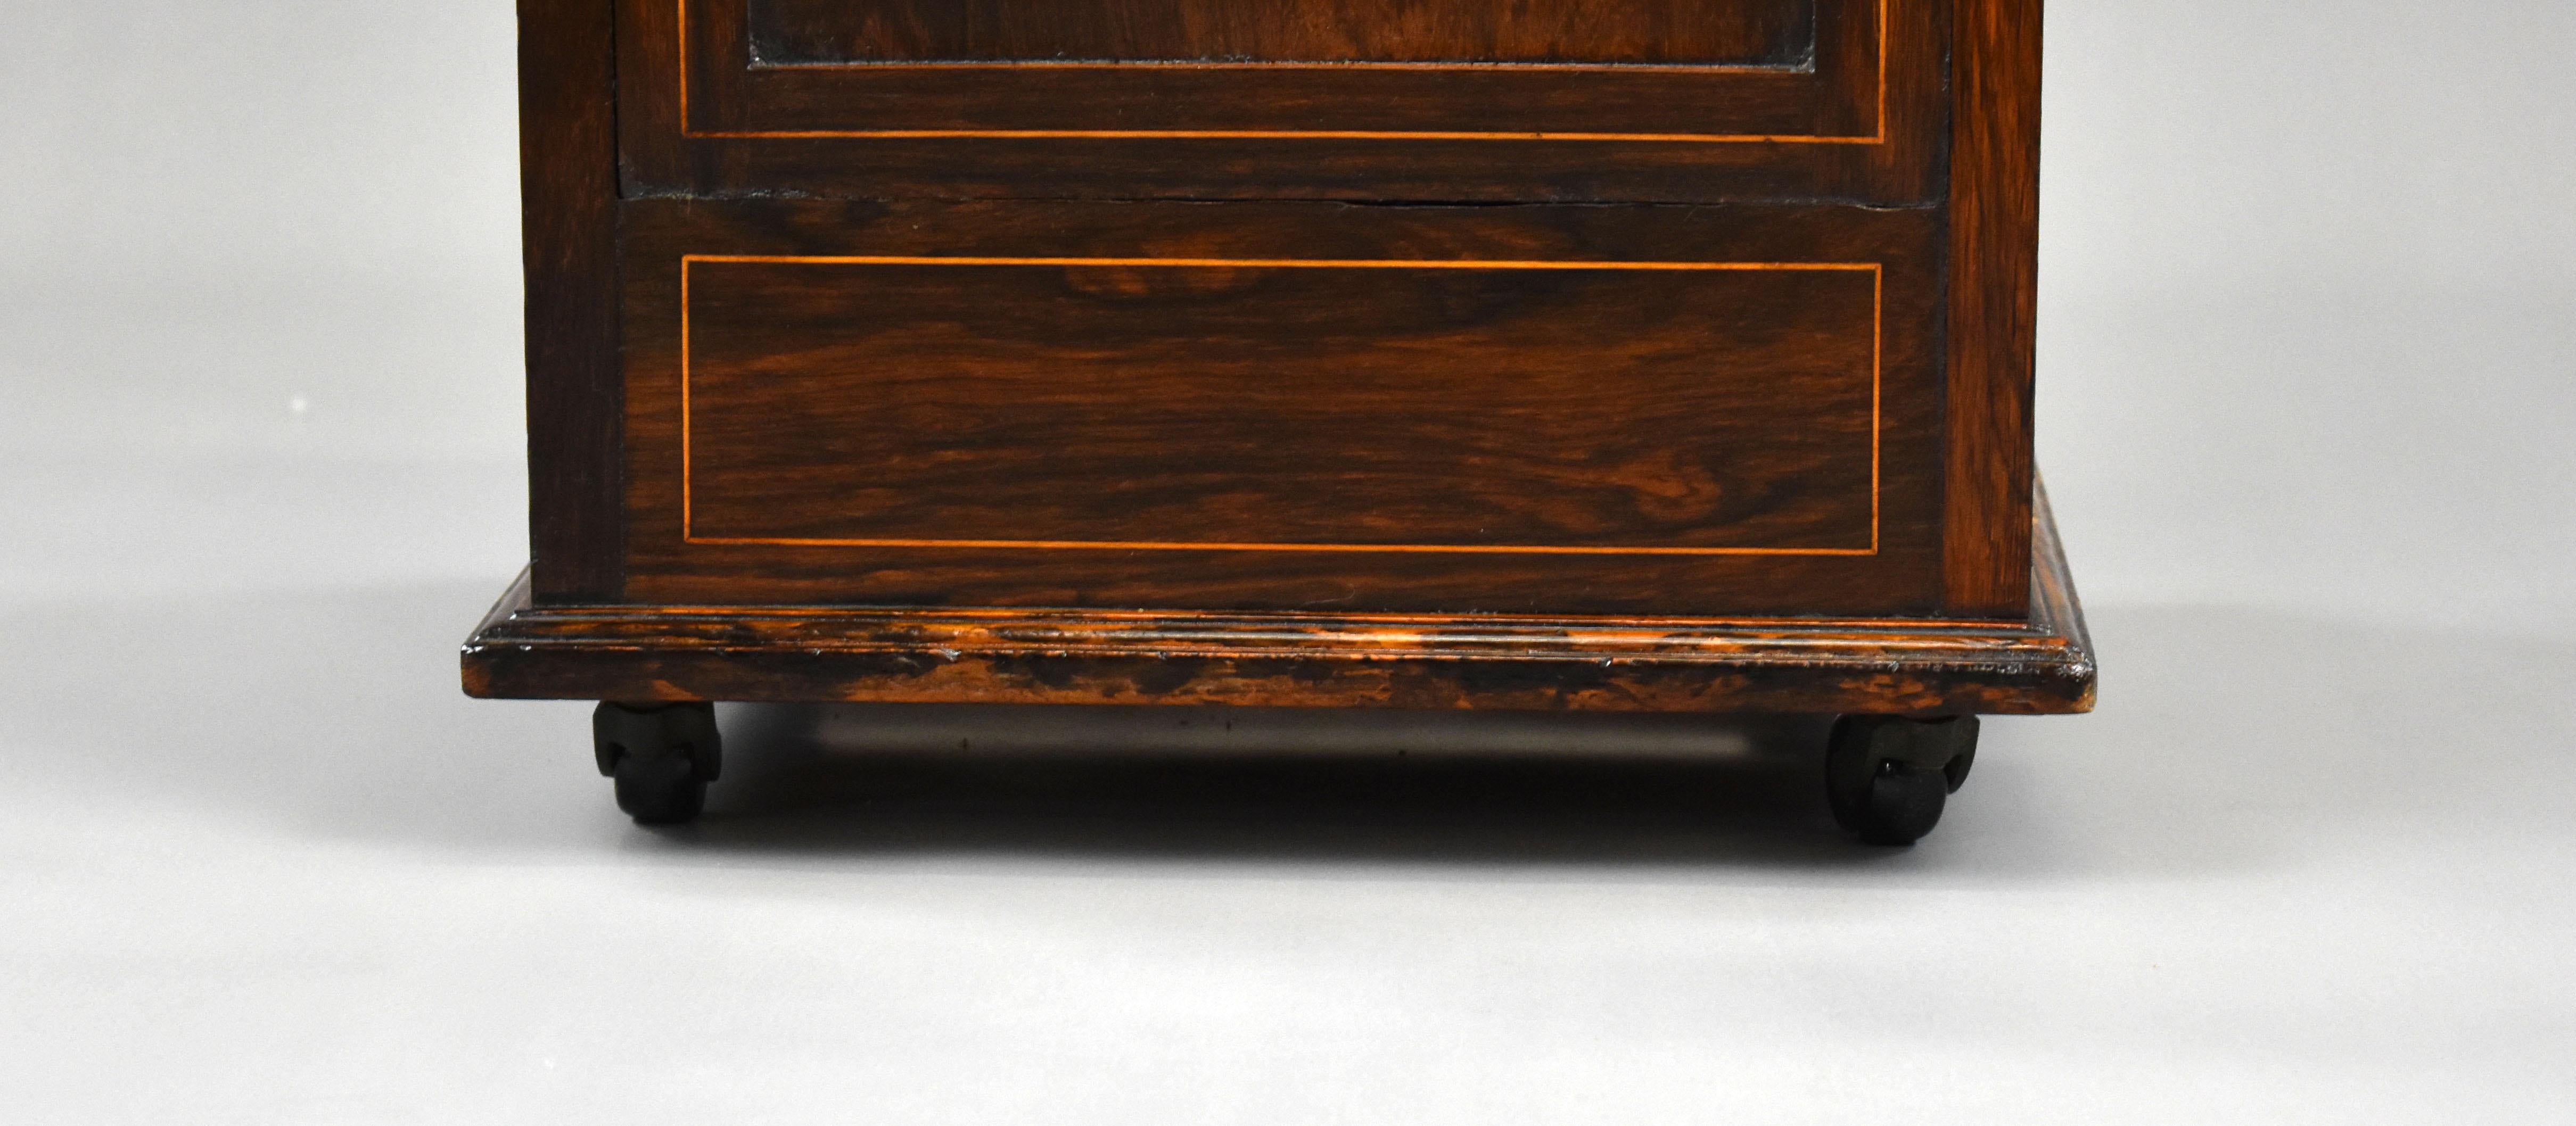 19th Century English Victorian Rosewood Marquetry Coal Purdonium For Sale 3